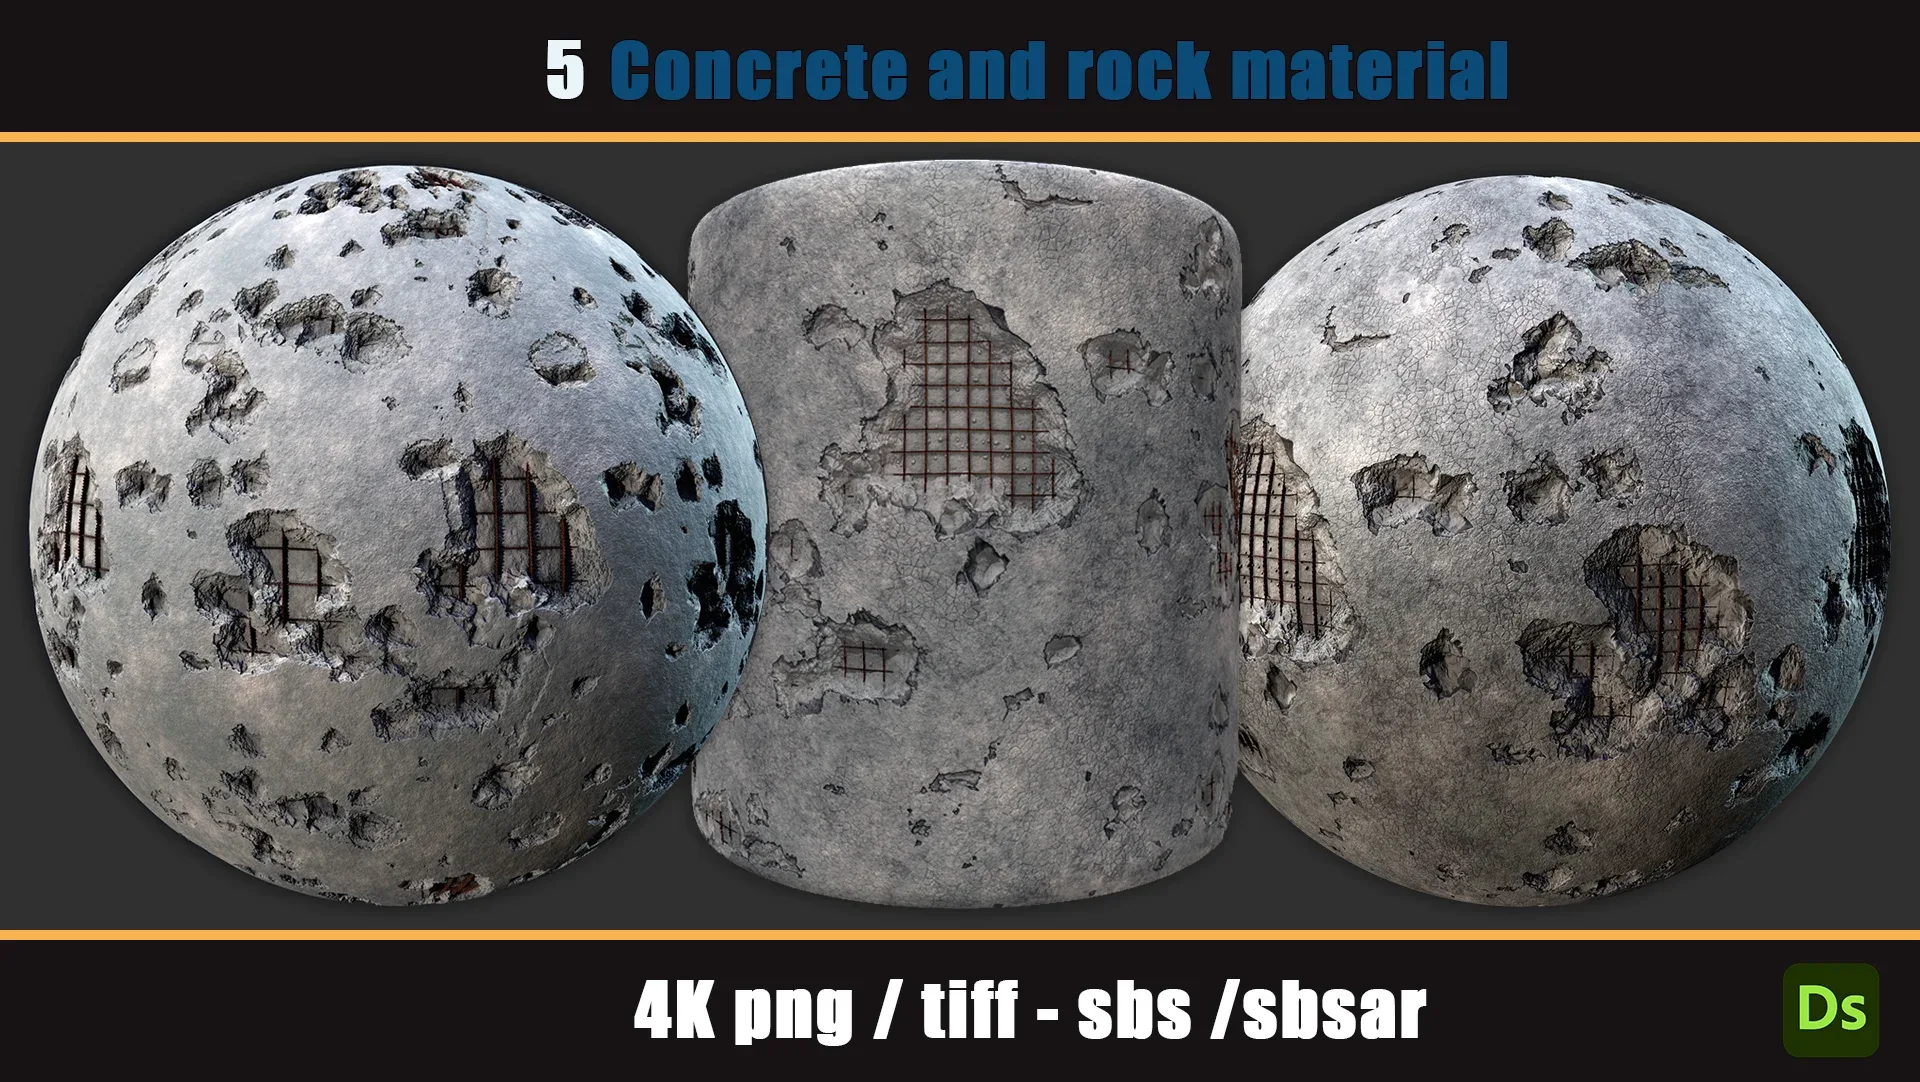 5 PBR concrete and rock material 4k PNG, TIFF, SBS, SBSAR